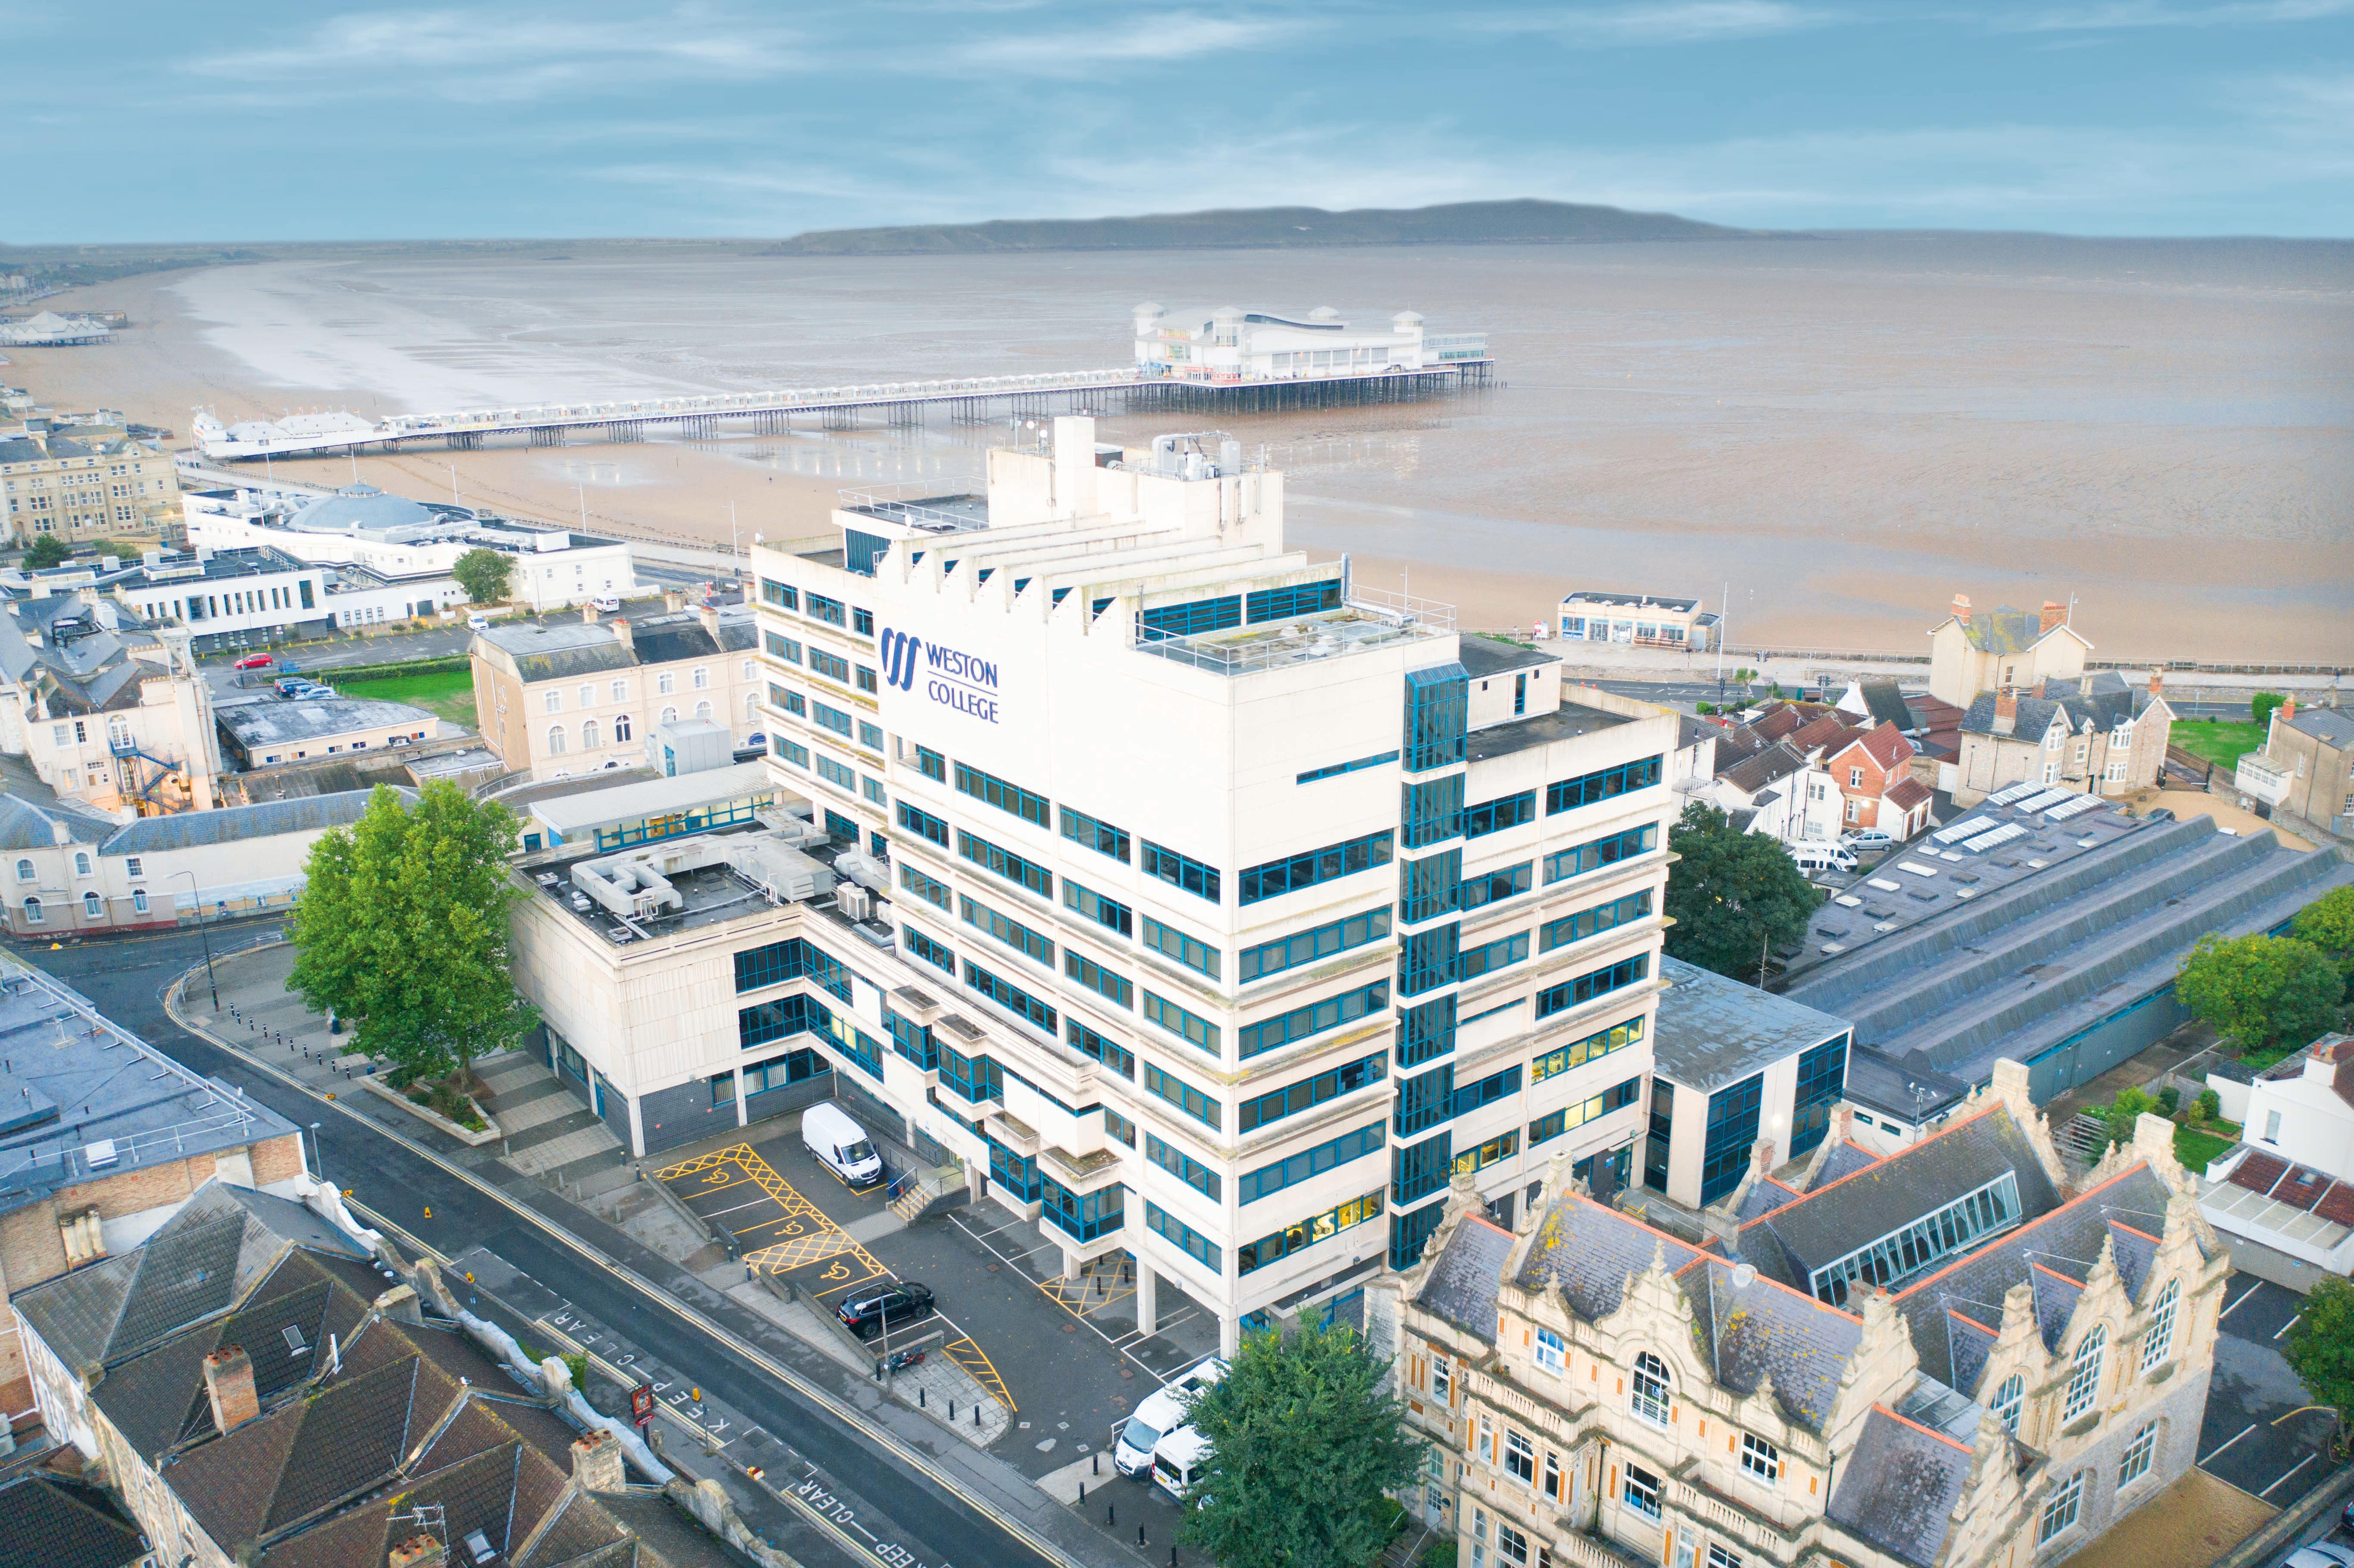 knightstone campus with the grand pier in the background